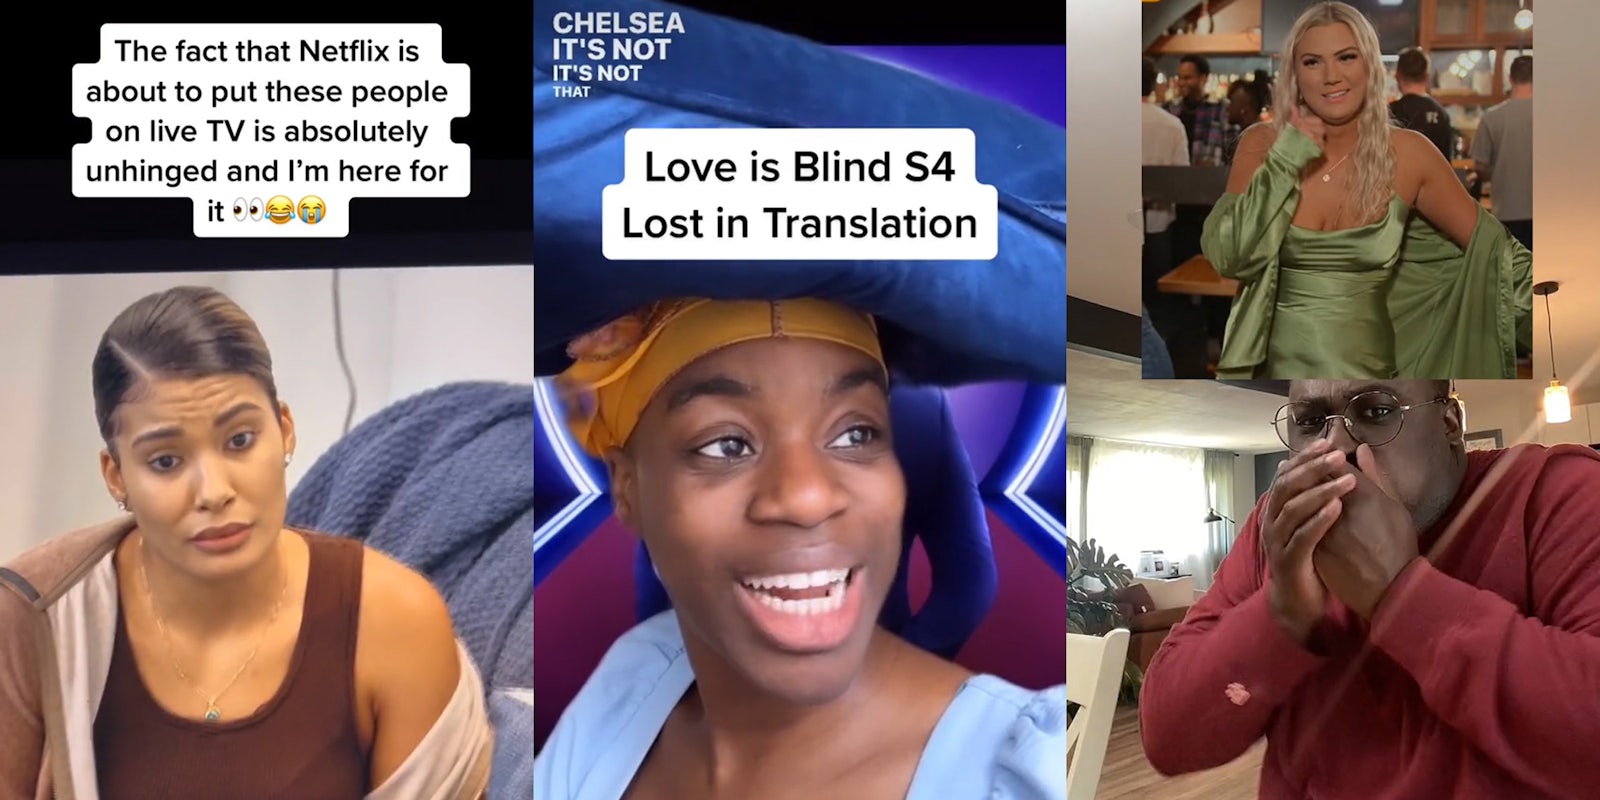 Love is Blind on screen with caption 'The fact that Netflix is about to put these people on live TV is absolutely unhinged and I'm here for it' (l) person wearing hat with caption 'Love is Blind S4 Lost in Translation' (c) person reacting to image of blond woman (r)